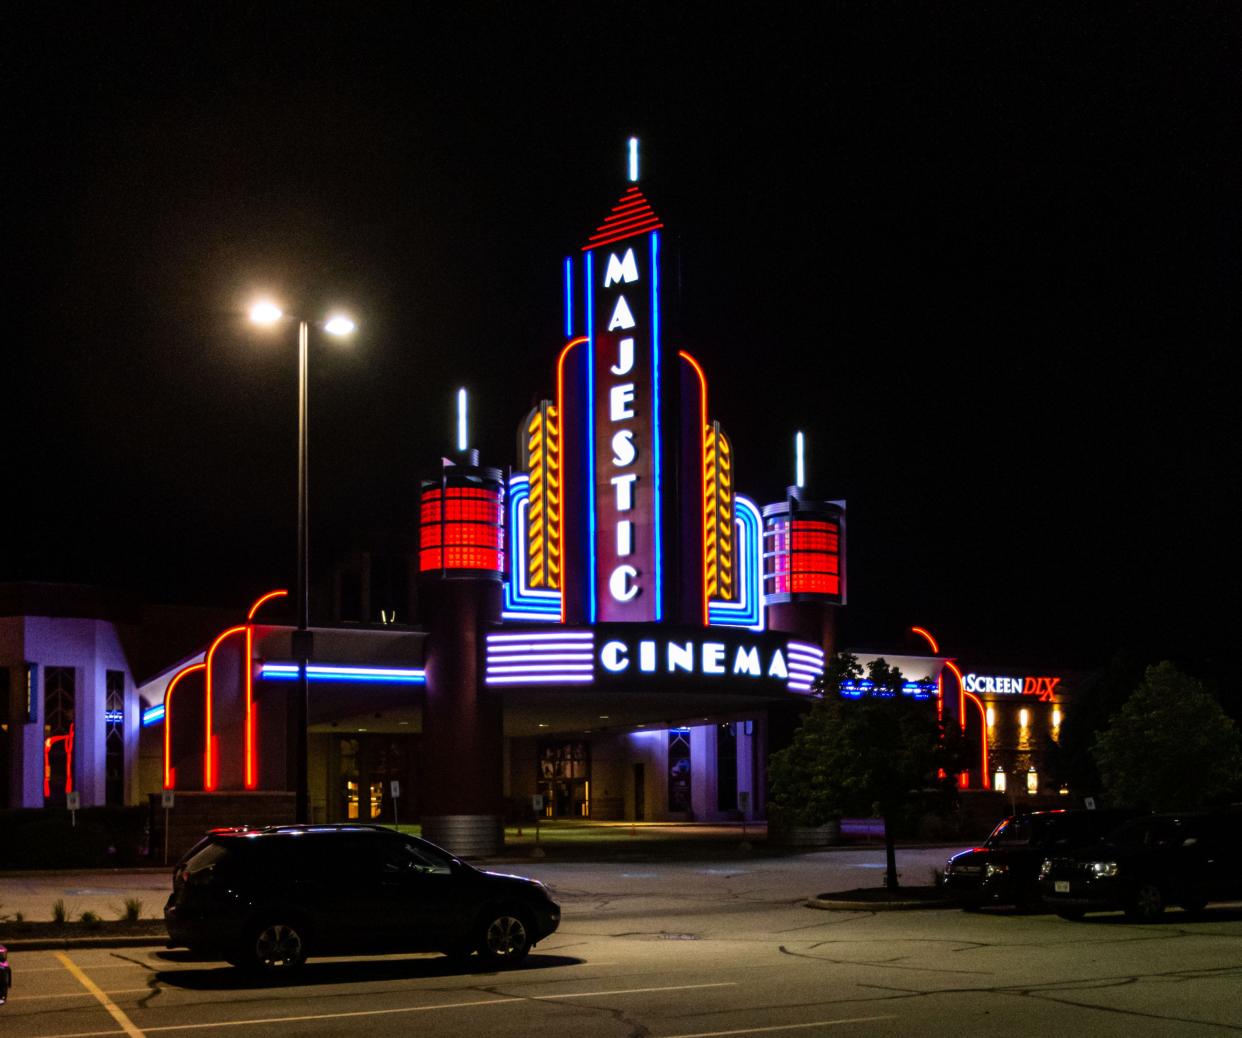 Marcus Majestic Cinema of Brookfield is one of the Marcus Theatres participating in the Summer Kids Dream family film series.